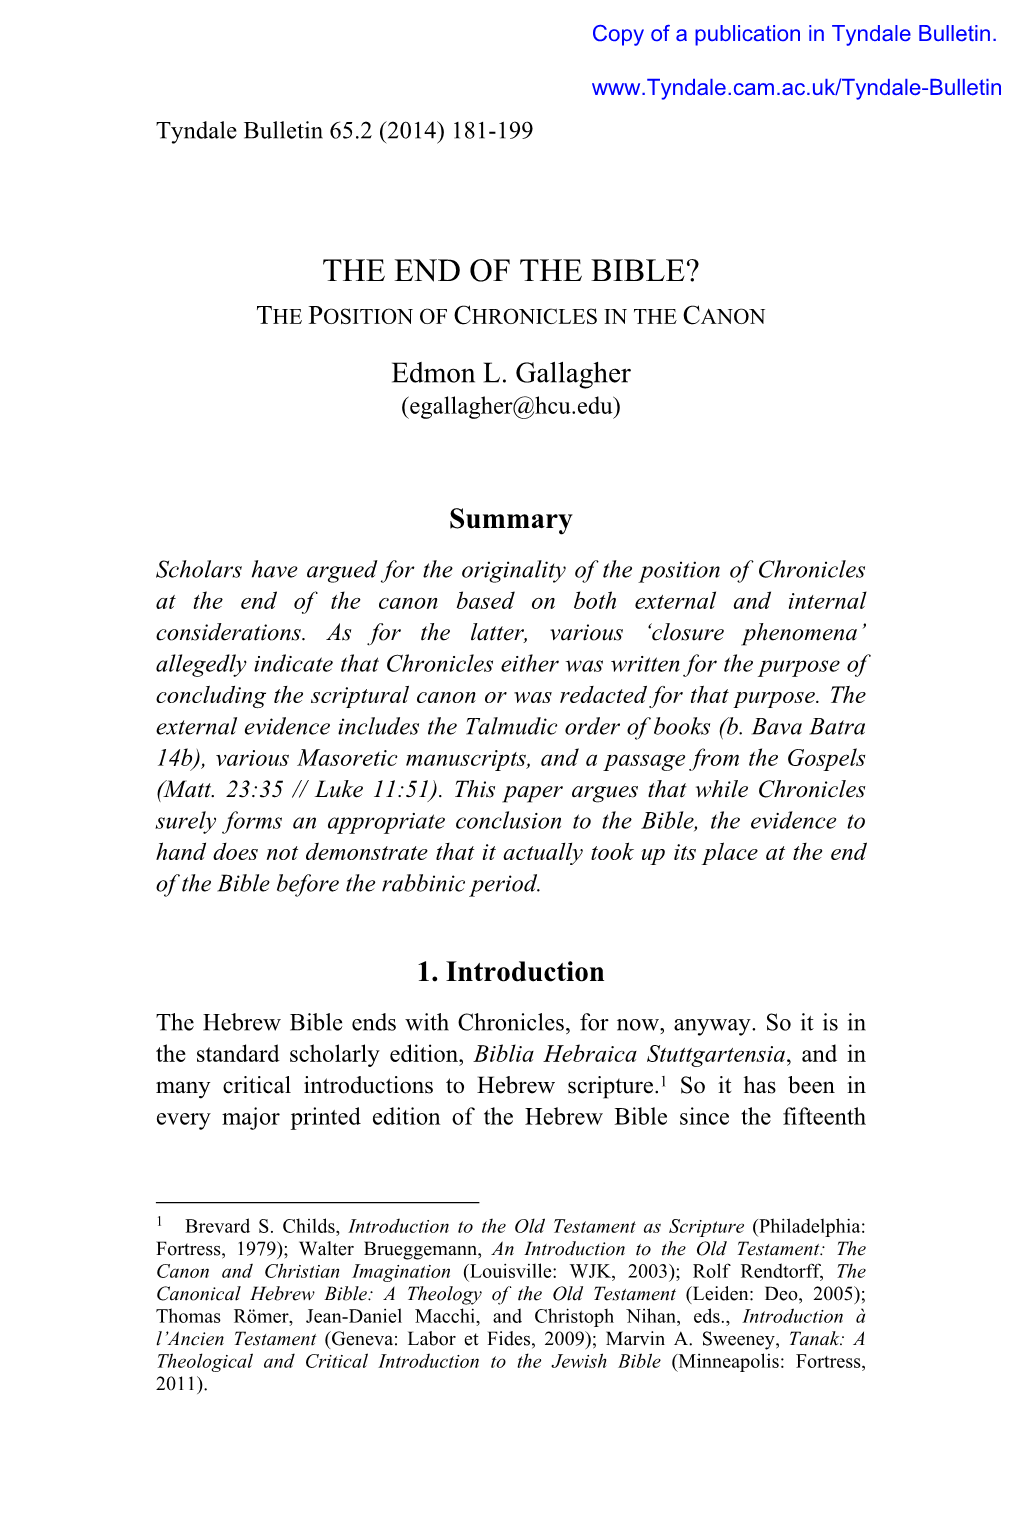 The End of the Bible? the Position of Chronicles in the Canon